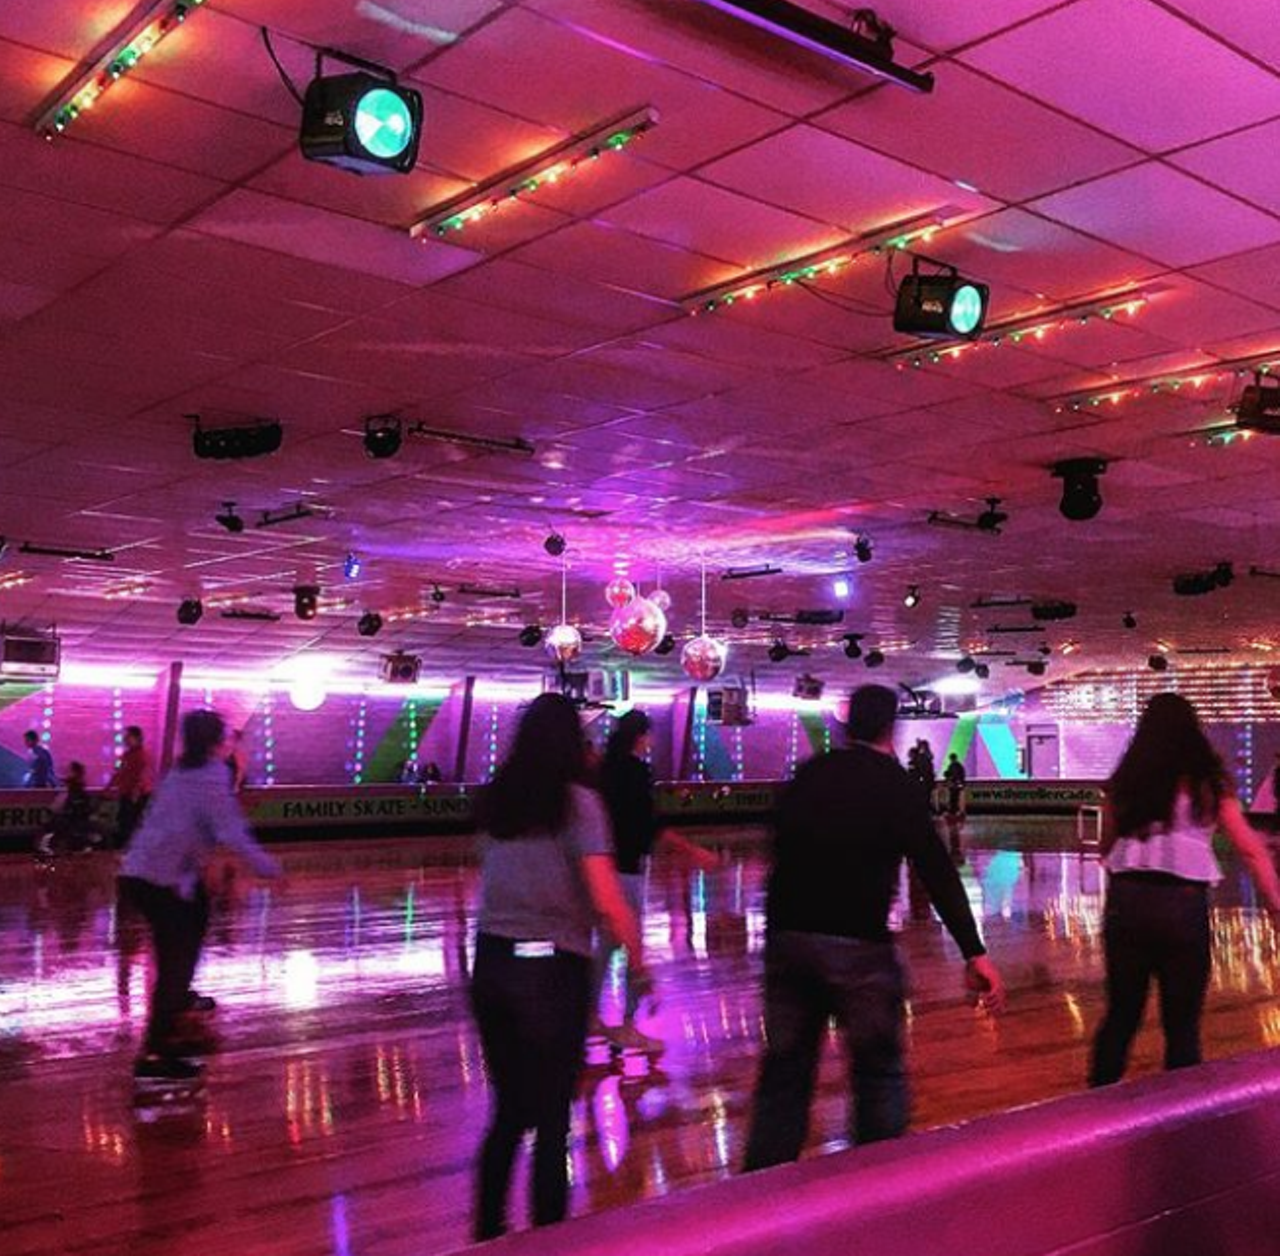 Get funky at the Rollercade
223 Recoleta Road, (210) 826-6361, therollercade.com
Treat you and your camp to a major throwback at this skating rink that’s been open since 1959. This neon-lit rink is complete with roller disco lighting channeling the ‘70s aesthetic, plus arcade games and a snack bar. So go on with your bad self and show off your moves.
Photo via Instagram / lovethehk